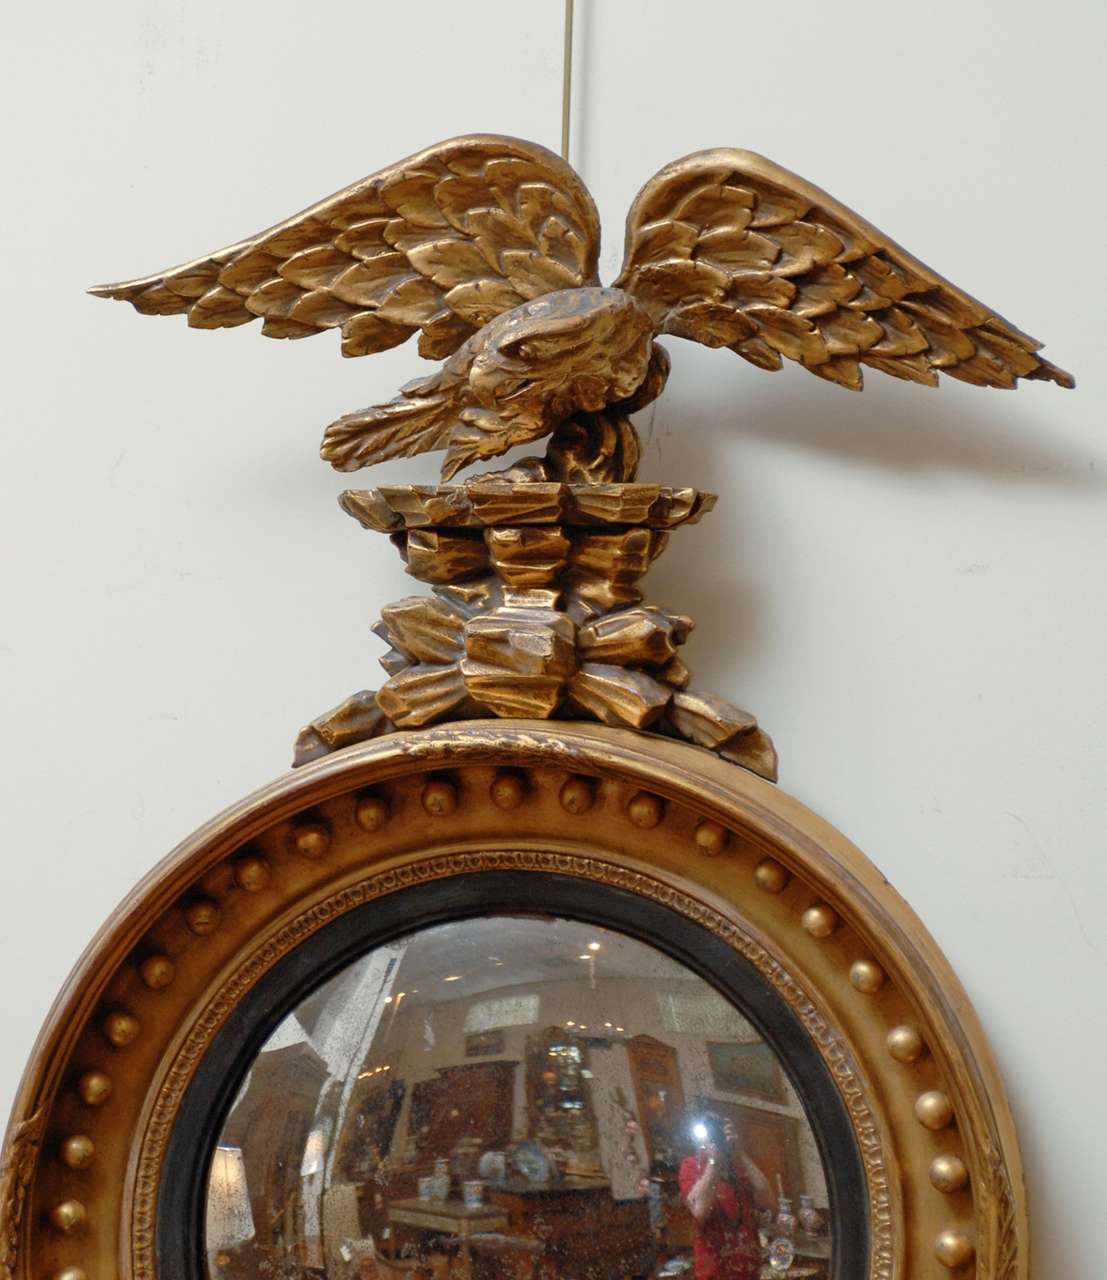 A 19th century English bull's eye convex mirror with eagle crest.

For many more fine antiques, please visit our online gallery at: www.williamwordantiques.com.

William Word Fine Antiques: Atlanta's source for antique interiors since 1956. 